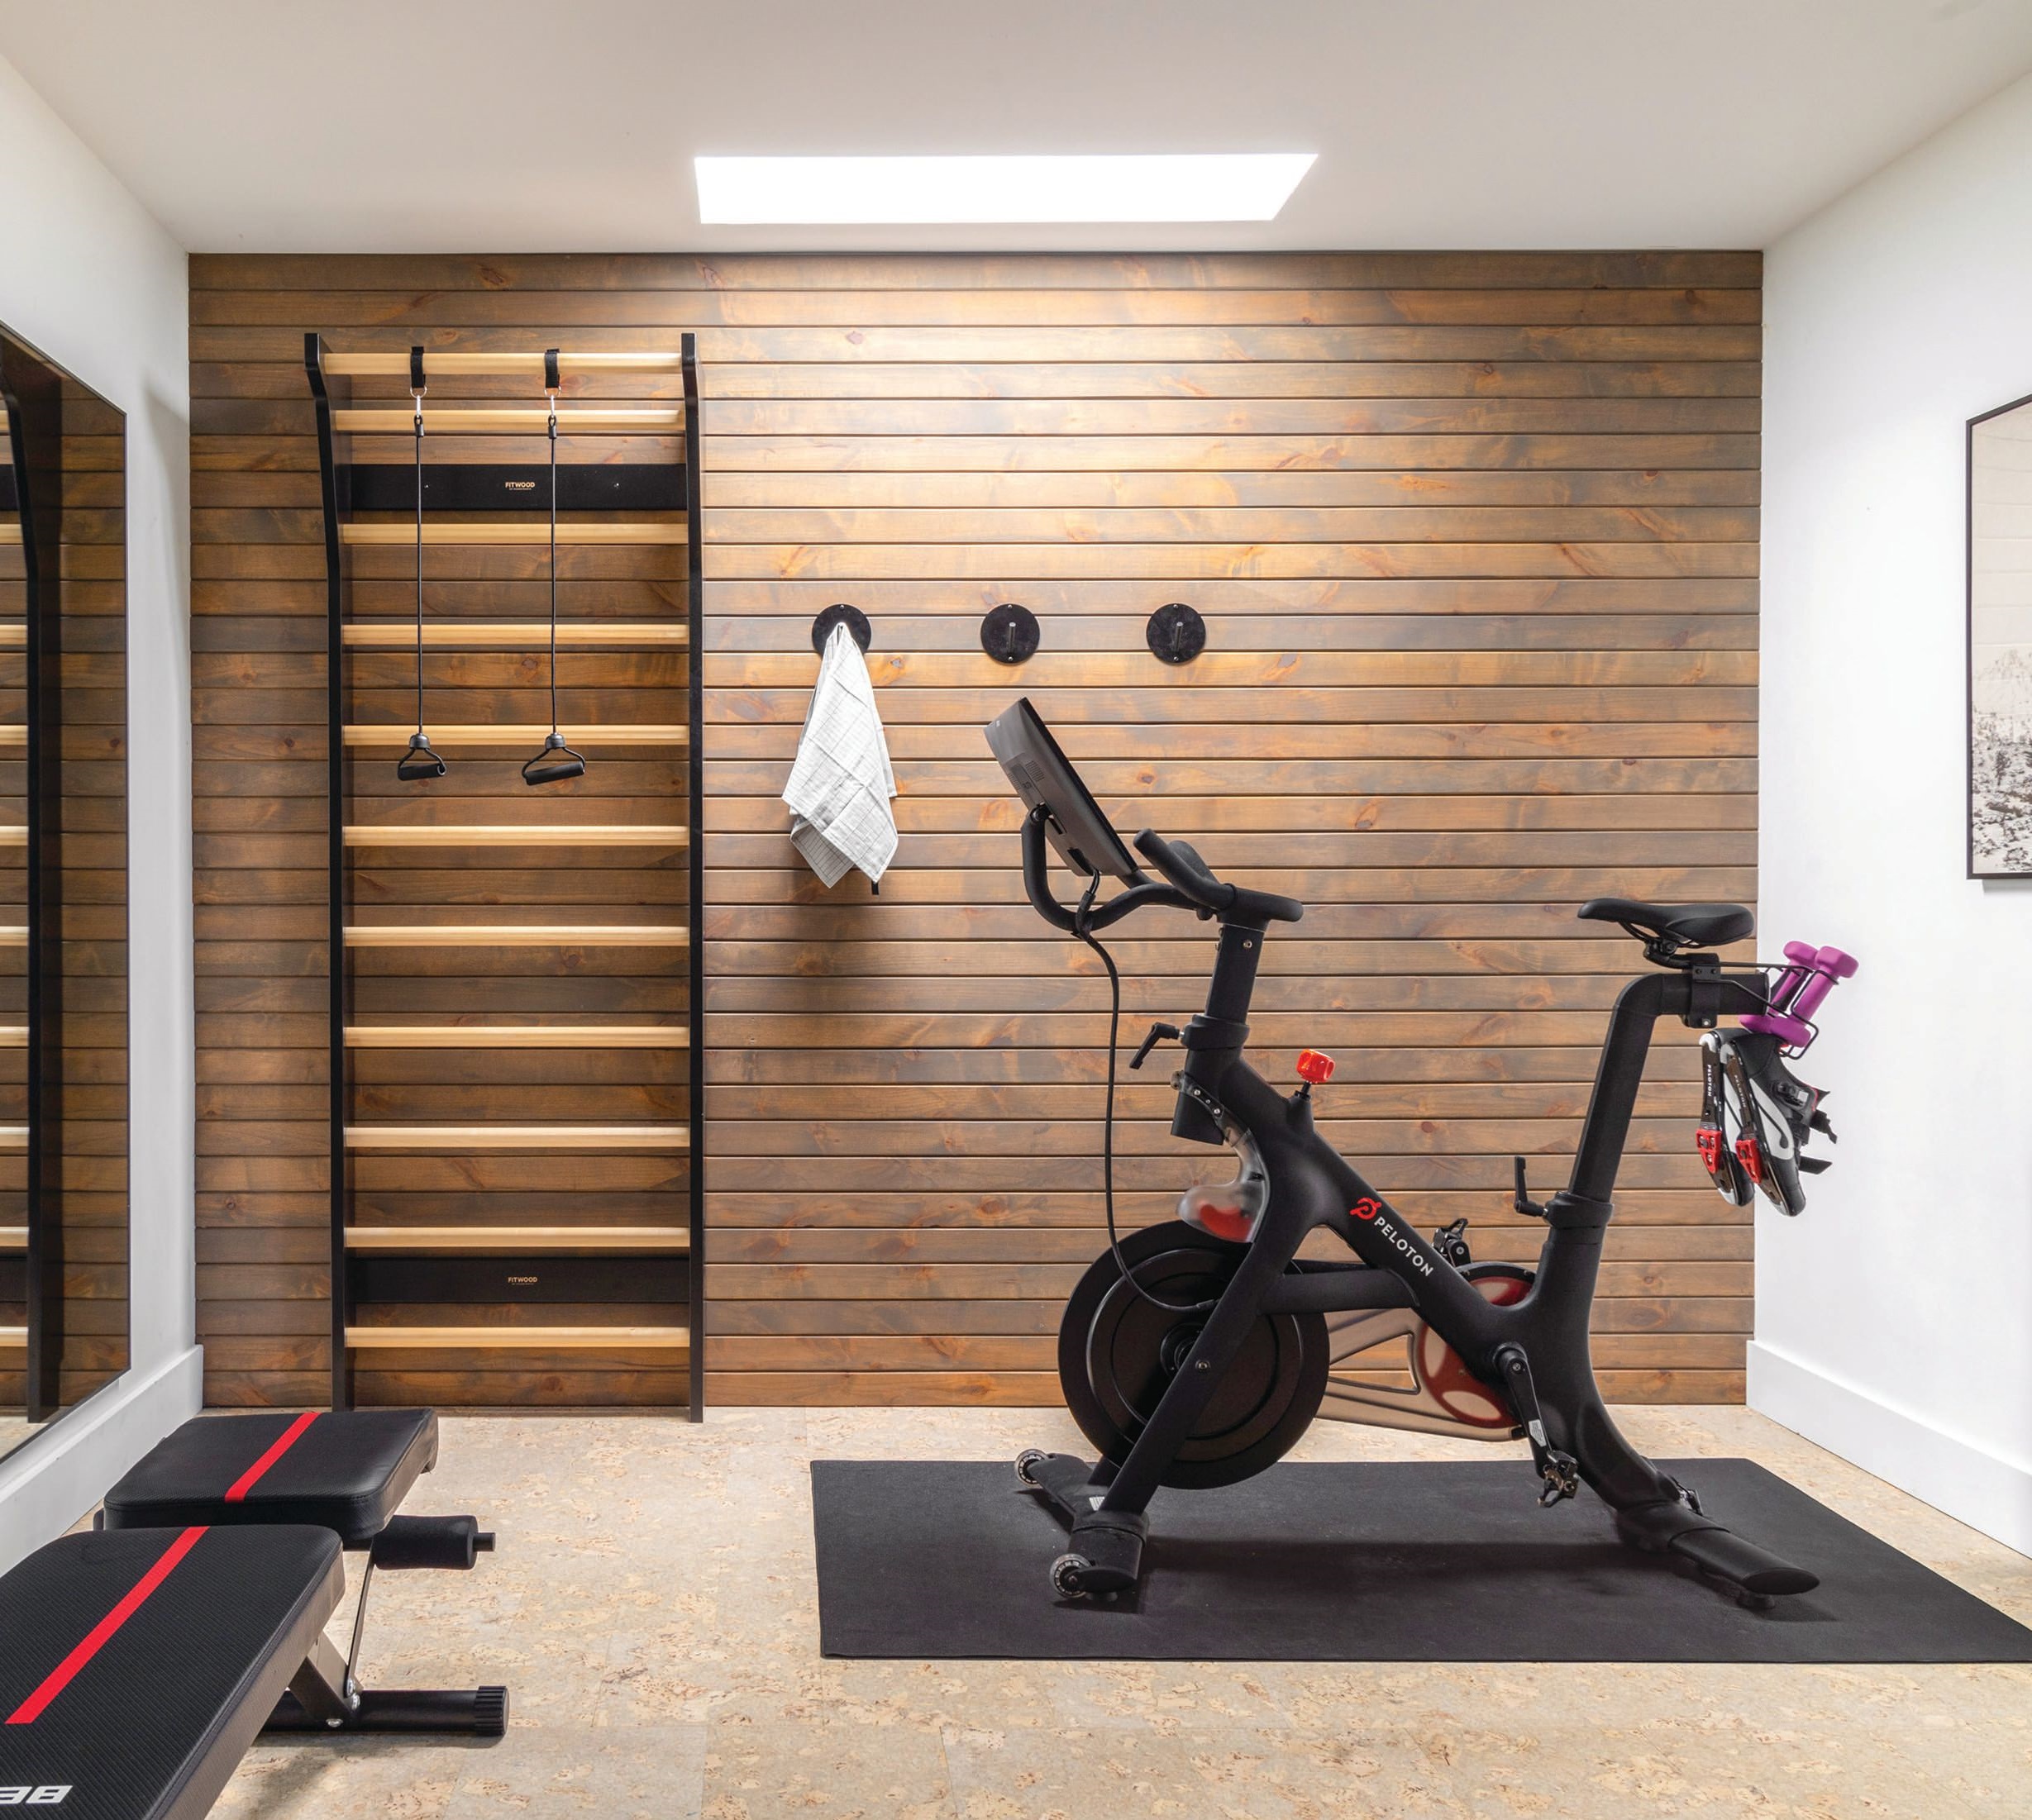 A custom slat wall by Luxury Woodworker and cork flooring by APC Cork warm up the gym area. Shelfology hooks and an art piece by Juniper Print Shop add a homey touch. Photographed by Kevin Brost